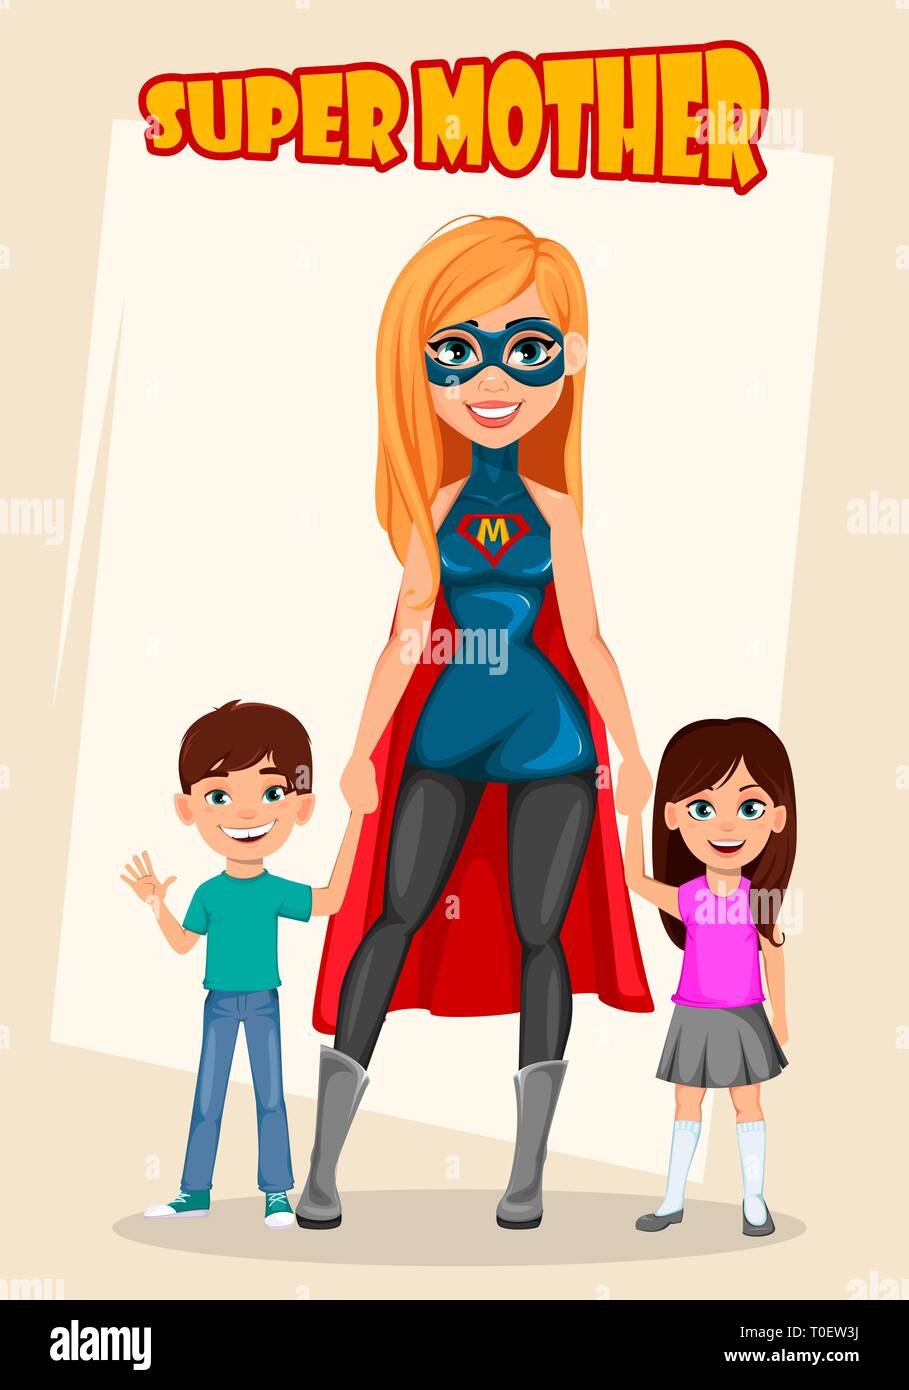 Super mother woman superhero. Concept of woman wearing superhero costume. Cartoon character holding her son and daughter. Vector illustration Stock Vector